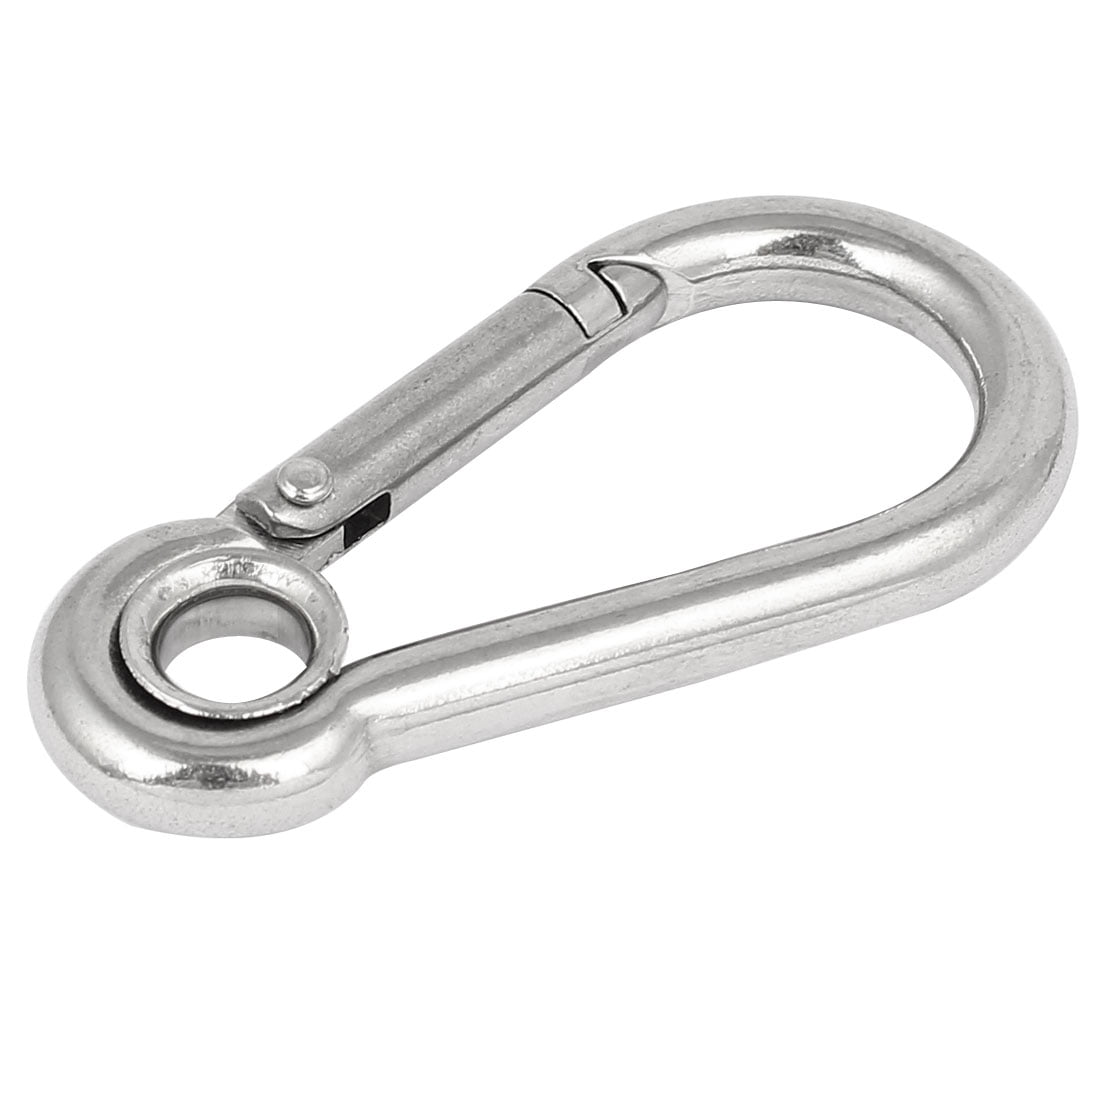 Gear 304 Stainless Steel Carabiner Safety Snap Hook Travel Kit Lock Ring 